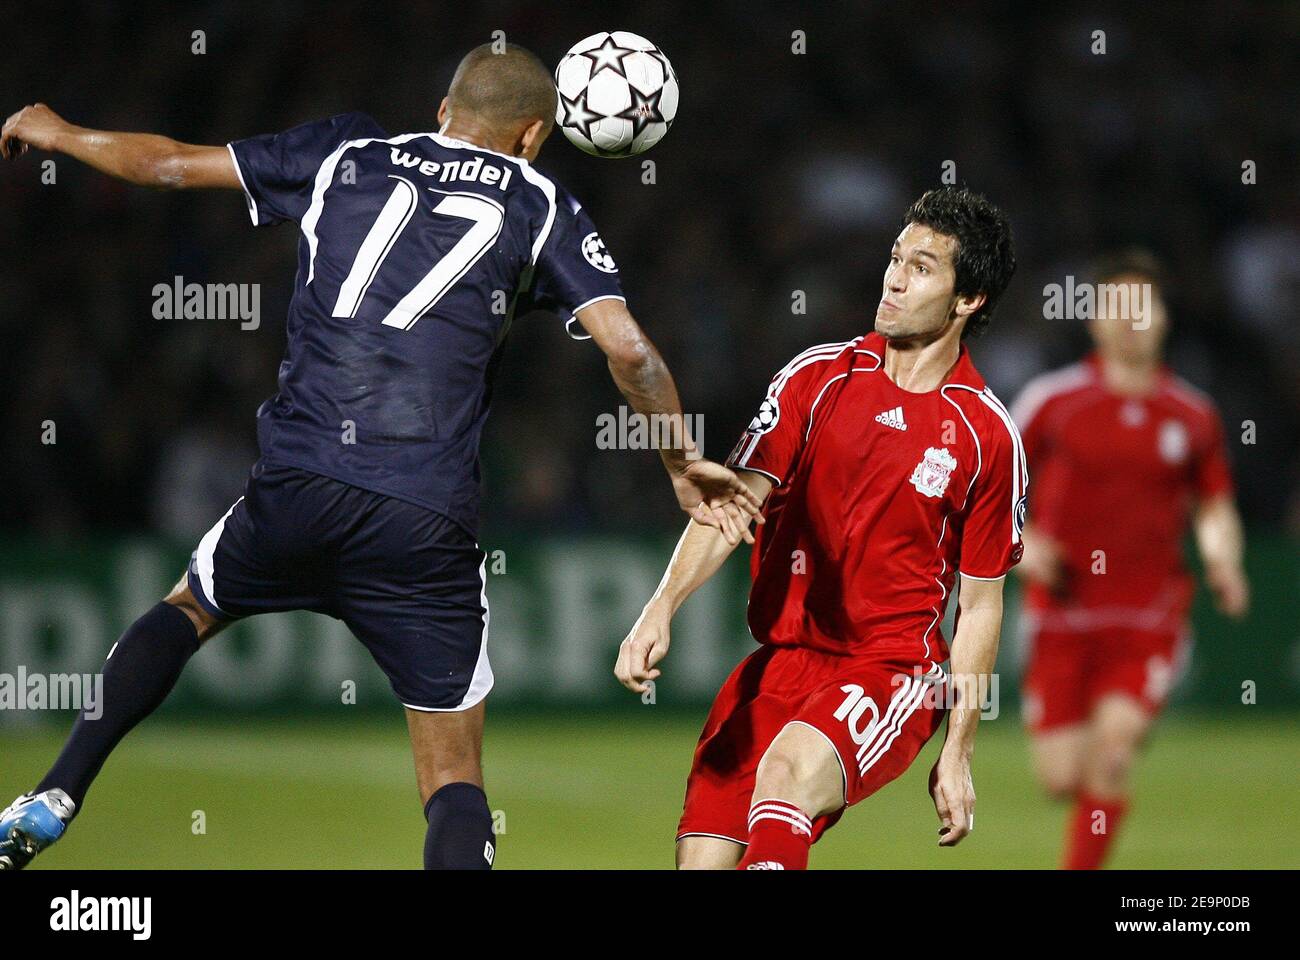 Bordeaux' Wendel heads the ball behind Liverpool's Luis Garcia during the UEFA Champions League, Group C, Girondins de Bordeaux vs Liverpool FC at the Stade Chaban-Delmas in Bordeaux, France on October 18, 2006. Liverpool won 1-0. Photo by Christian Liewig/ABACAPRESS.COM Stock Photo